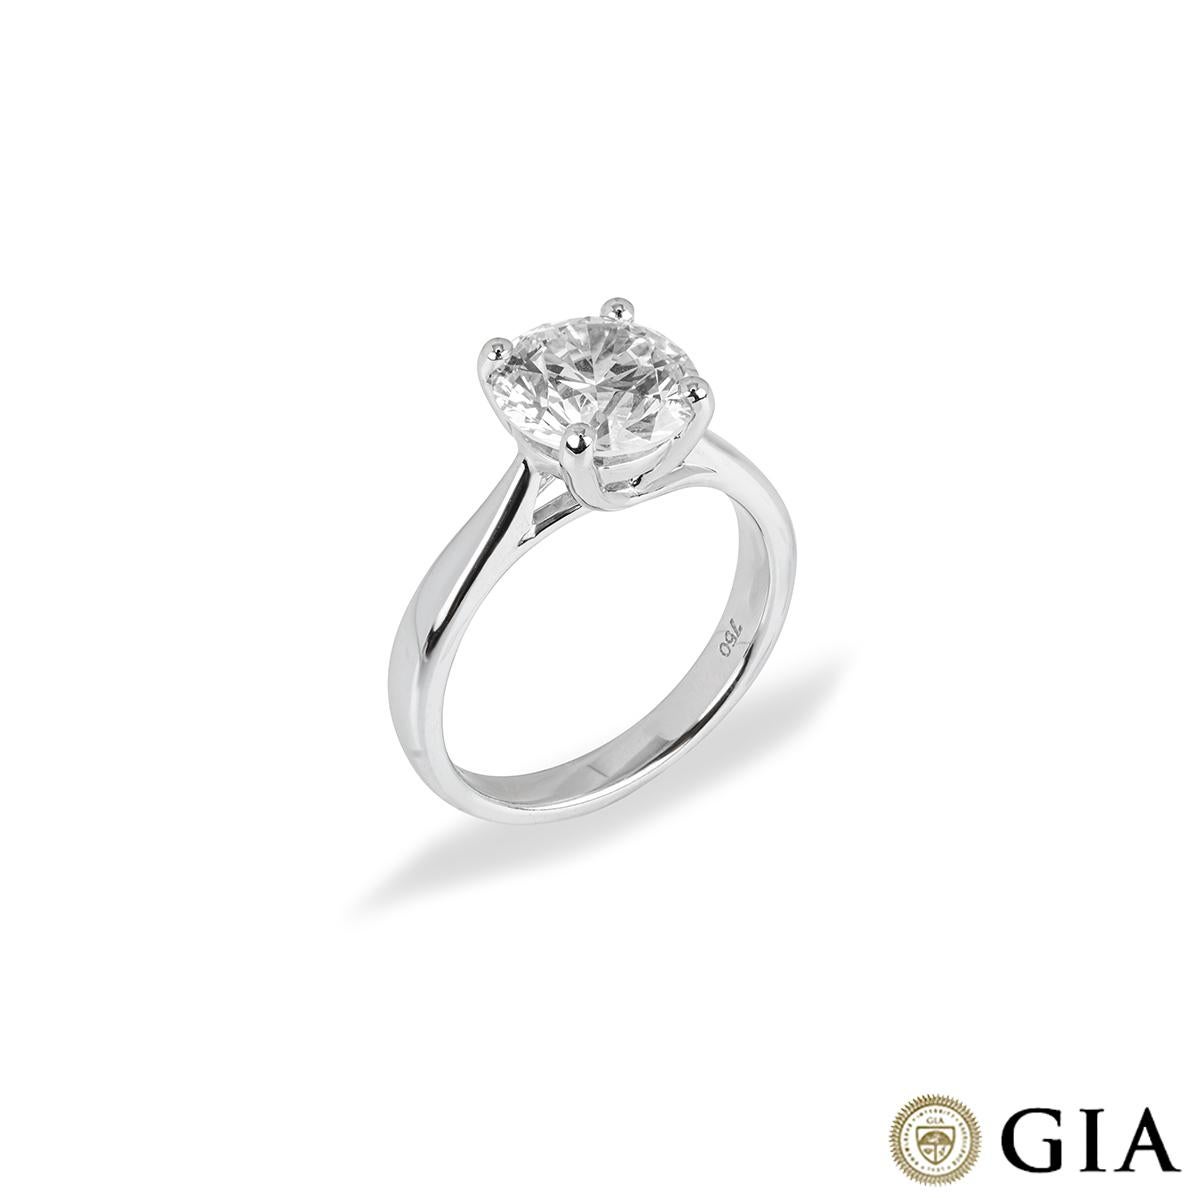 A beautiful 18k white gold diamond engagement ring. The solitaire ring comprises of a round brilliant cut diamond in a four claw setting with a weight of 2.71ct, M colour and VS2 clarity. The diamond scores an excellent rating in all three aspects